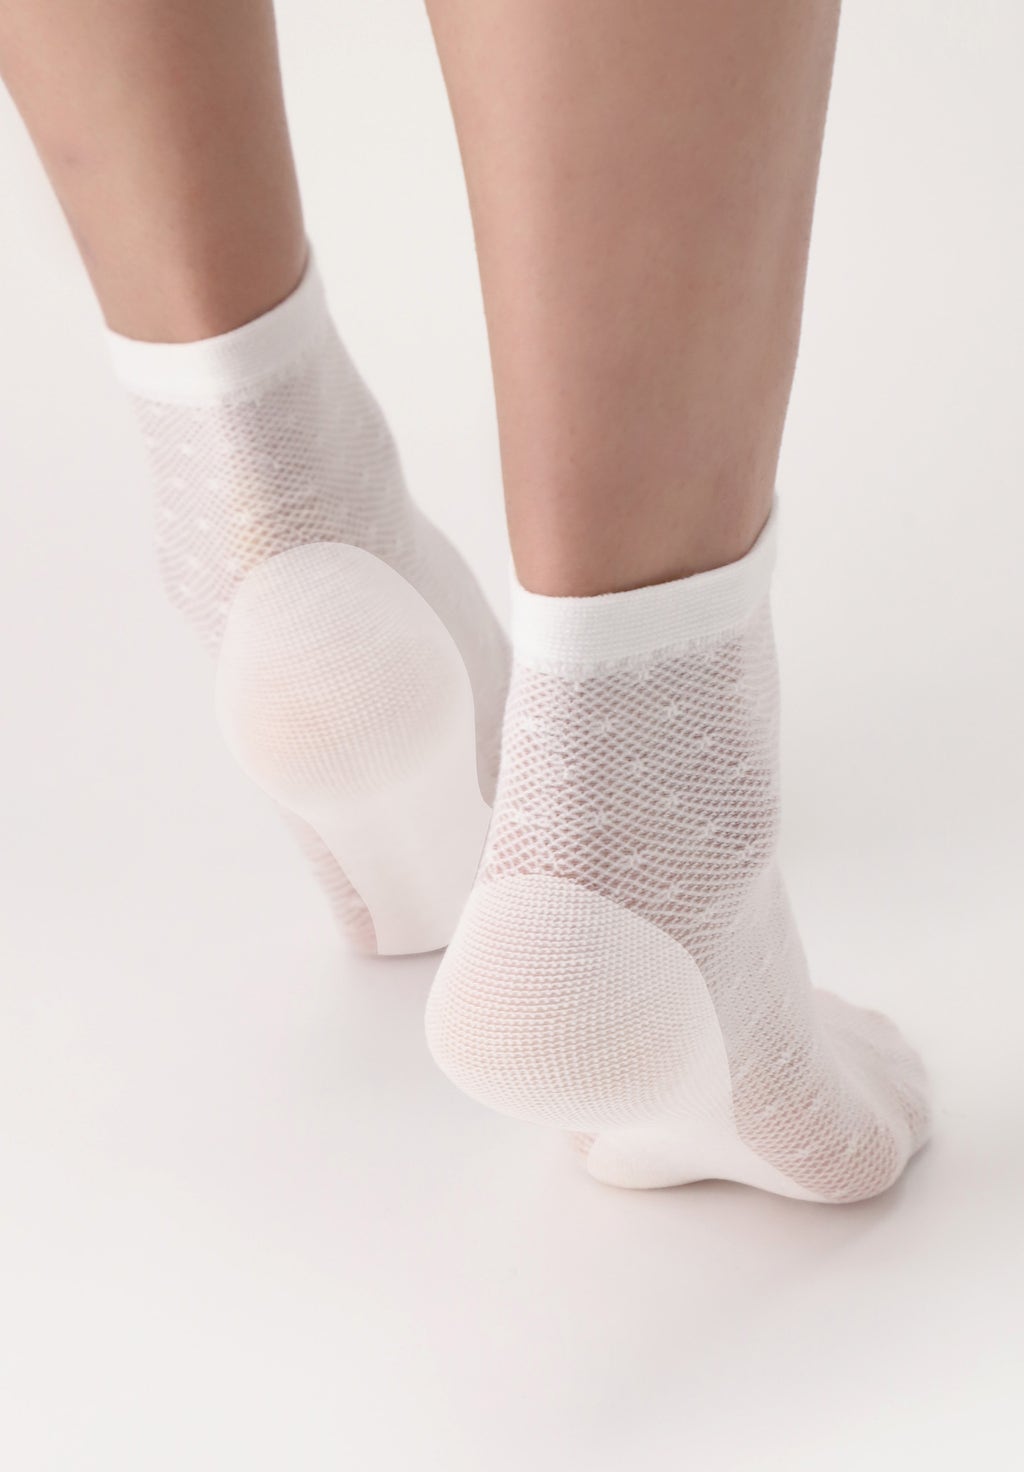 OroblÌ_ Eco Sneaker Sock - White (milk) environmentally friendly fashion quarter high ankle socks made of recycled yarn with a semi-sheer micro-mesh base, woven all over spot pattern, plain under foot, thin cuff and shaped heel.